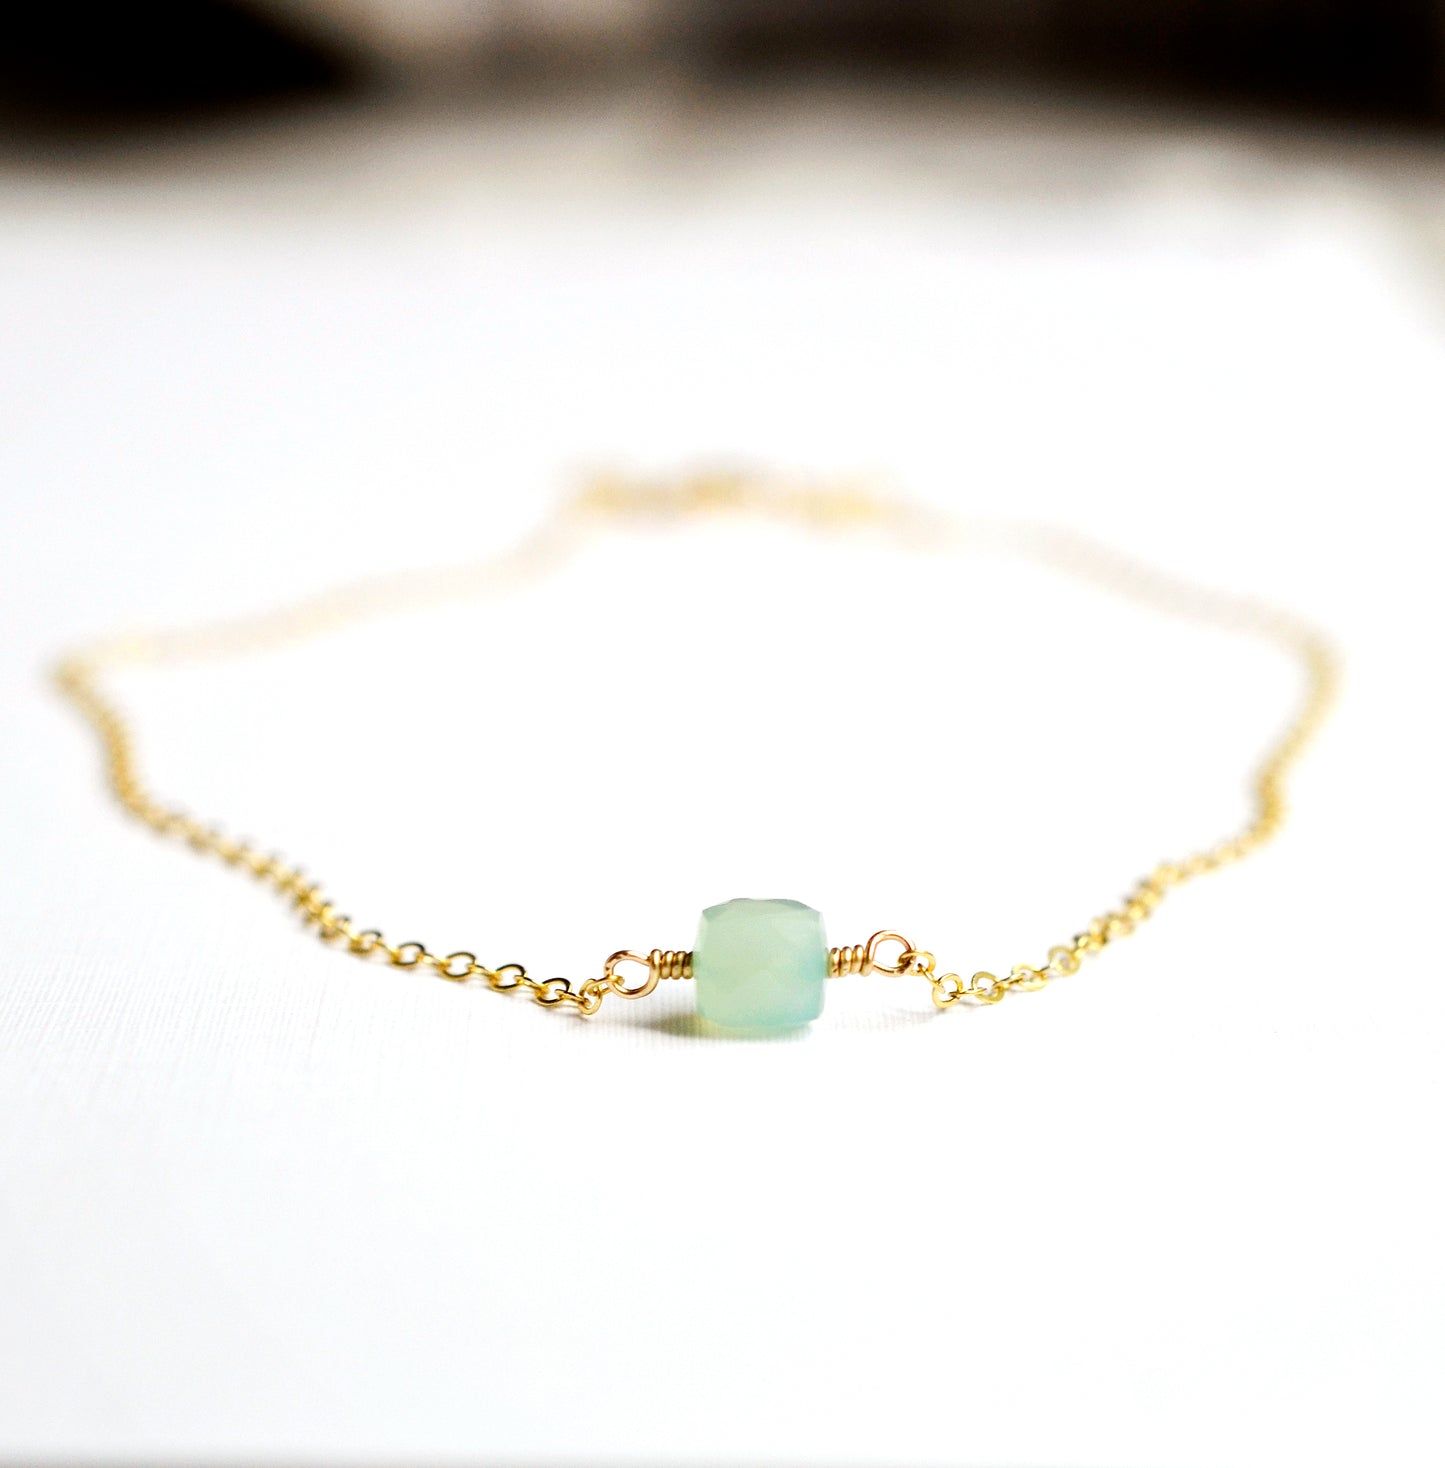 Aqua Blue Chalcedony Necklace, Cube Shape, Sterling Silver or 14k Gold Filled